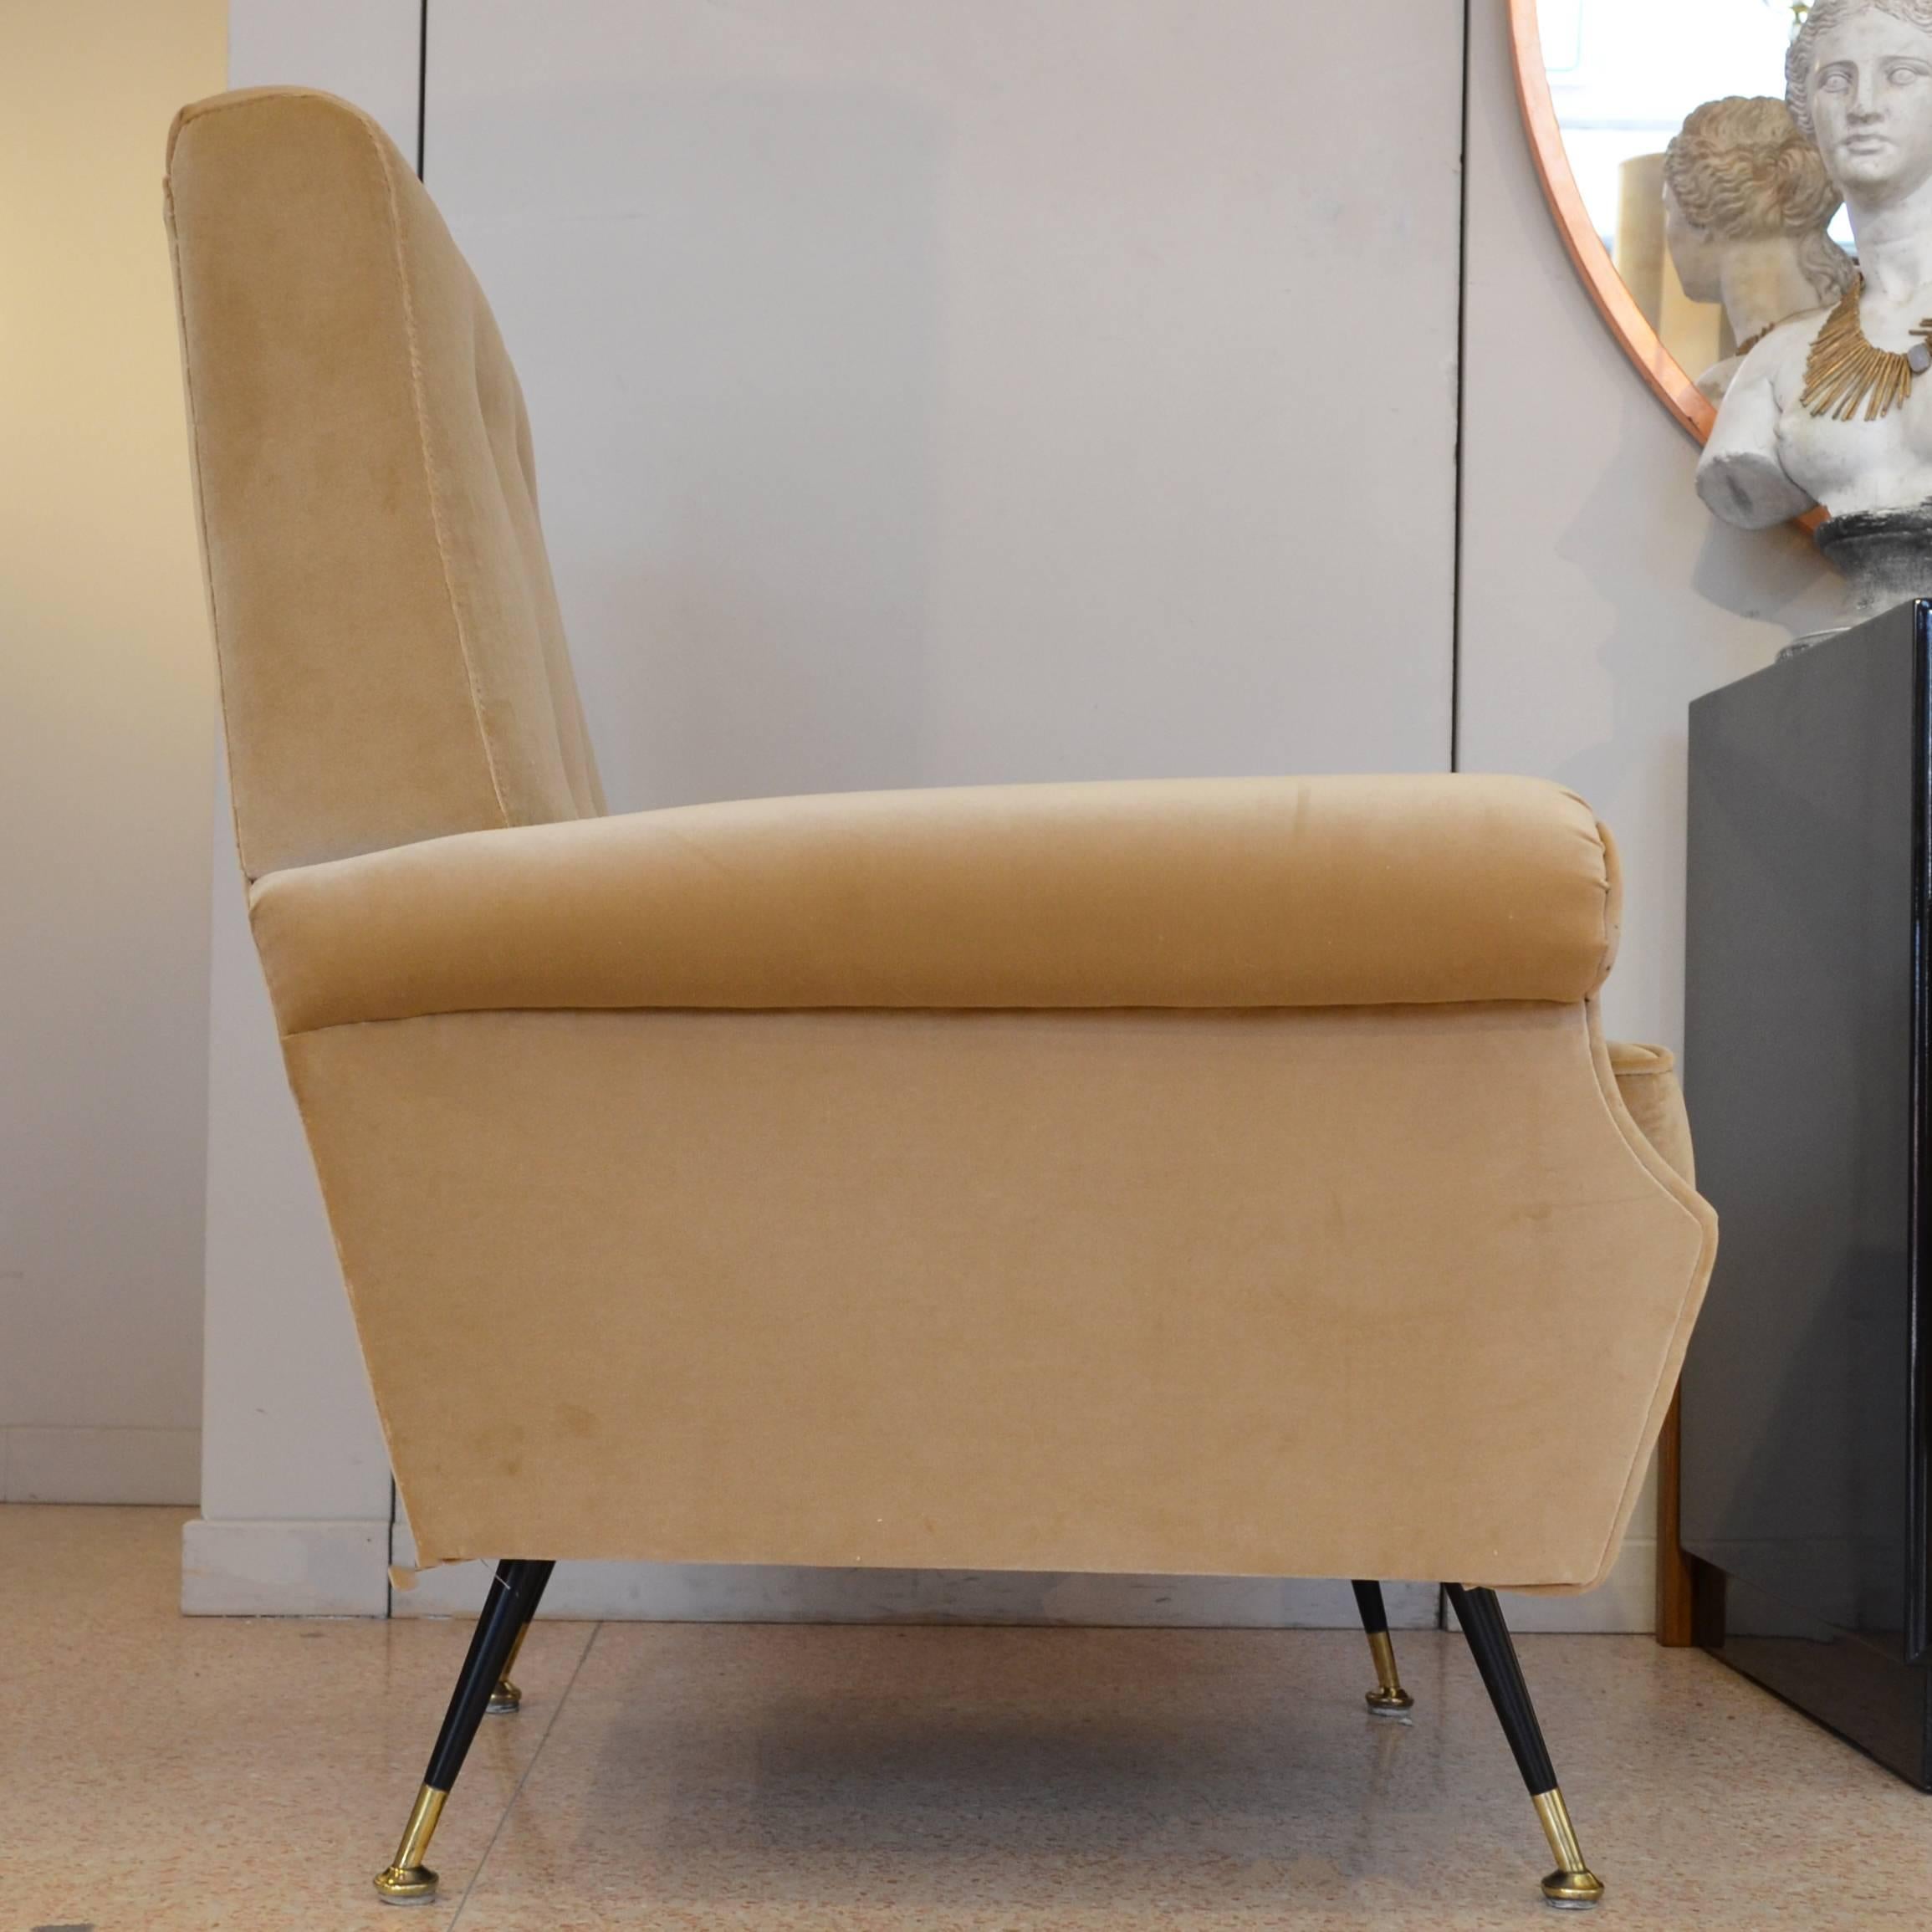 Italian armchairs from 1950s with typical shape of vintage armchairs. Legs made of iron, end with brass details to give the idea of lightness as per Gio Ponti theory so important for this period in Italy.
Velvet upholstery is beige colour and is